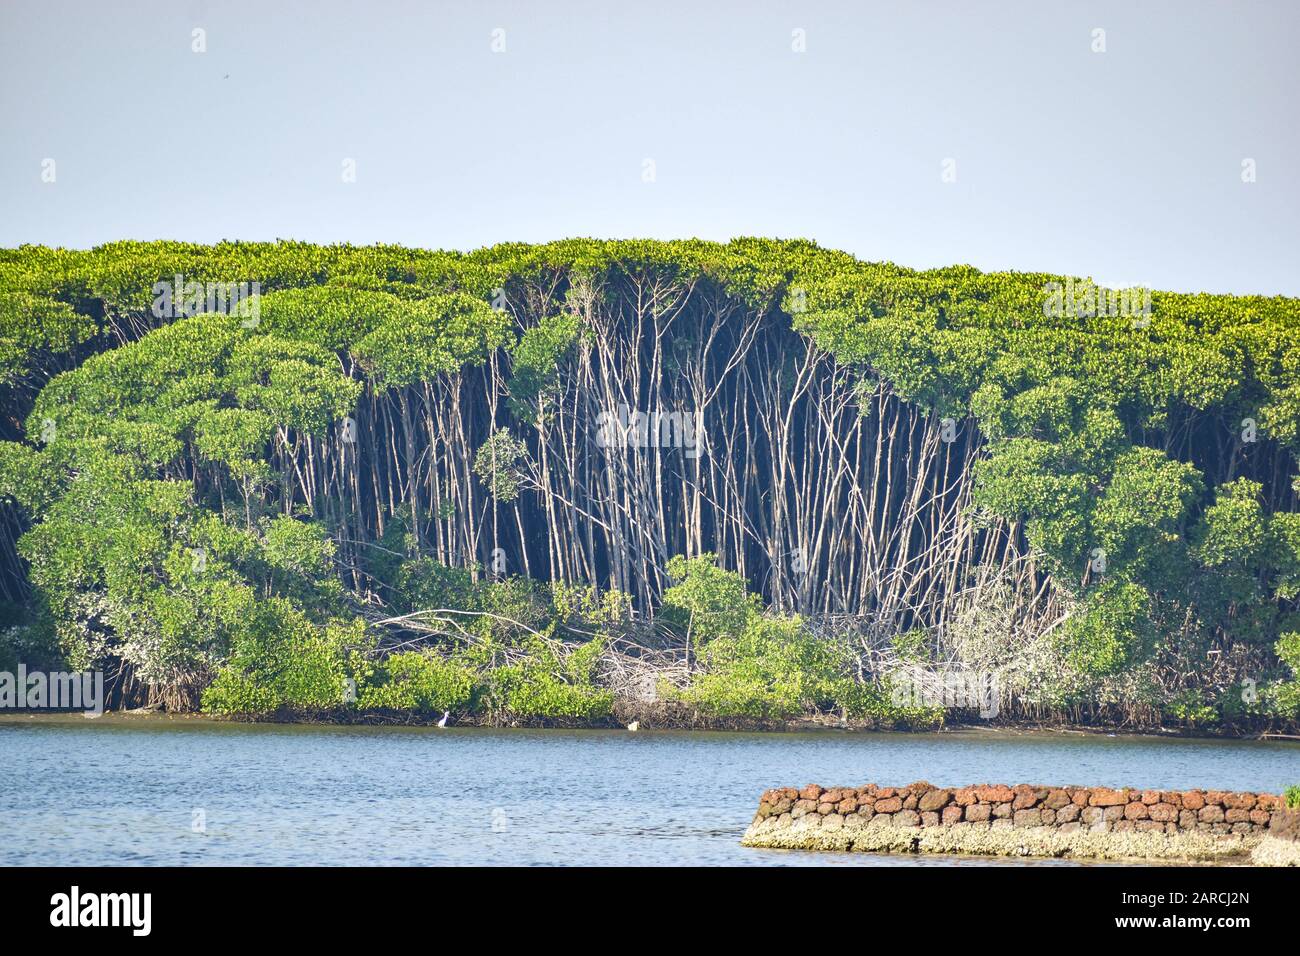 Scenic view of mangrove trees, coastal blue waters and clear blue sky Stock Photo